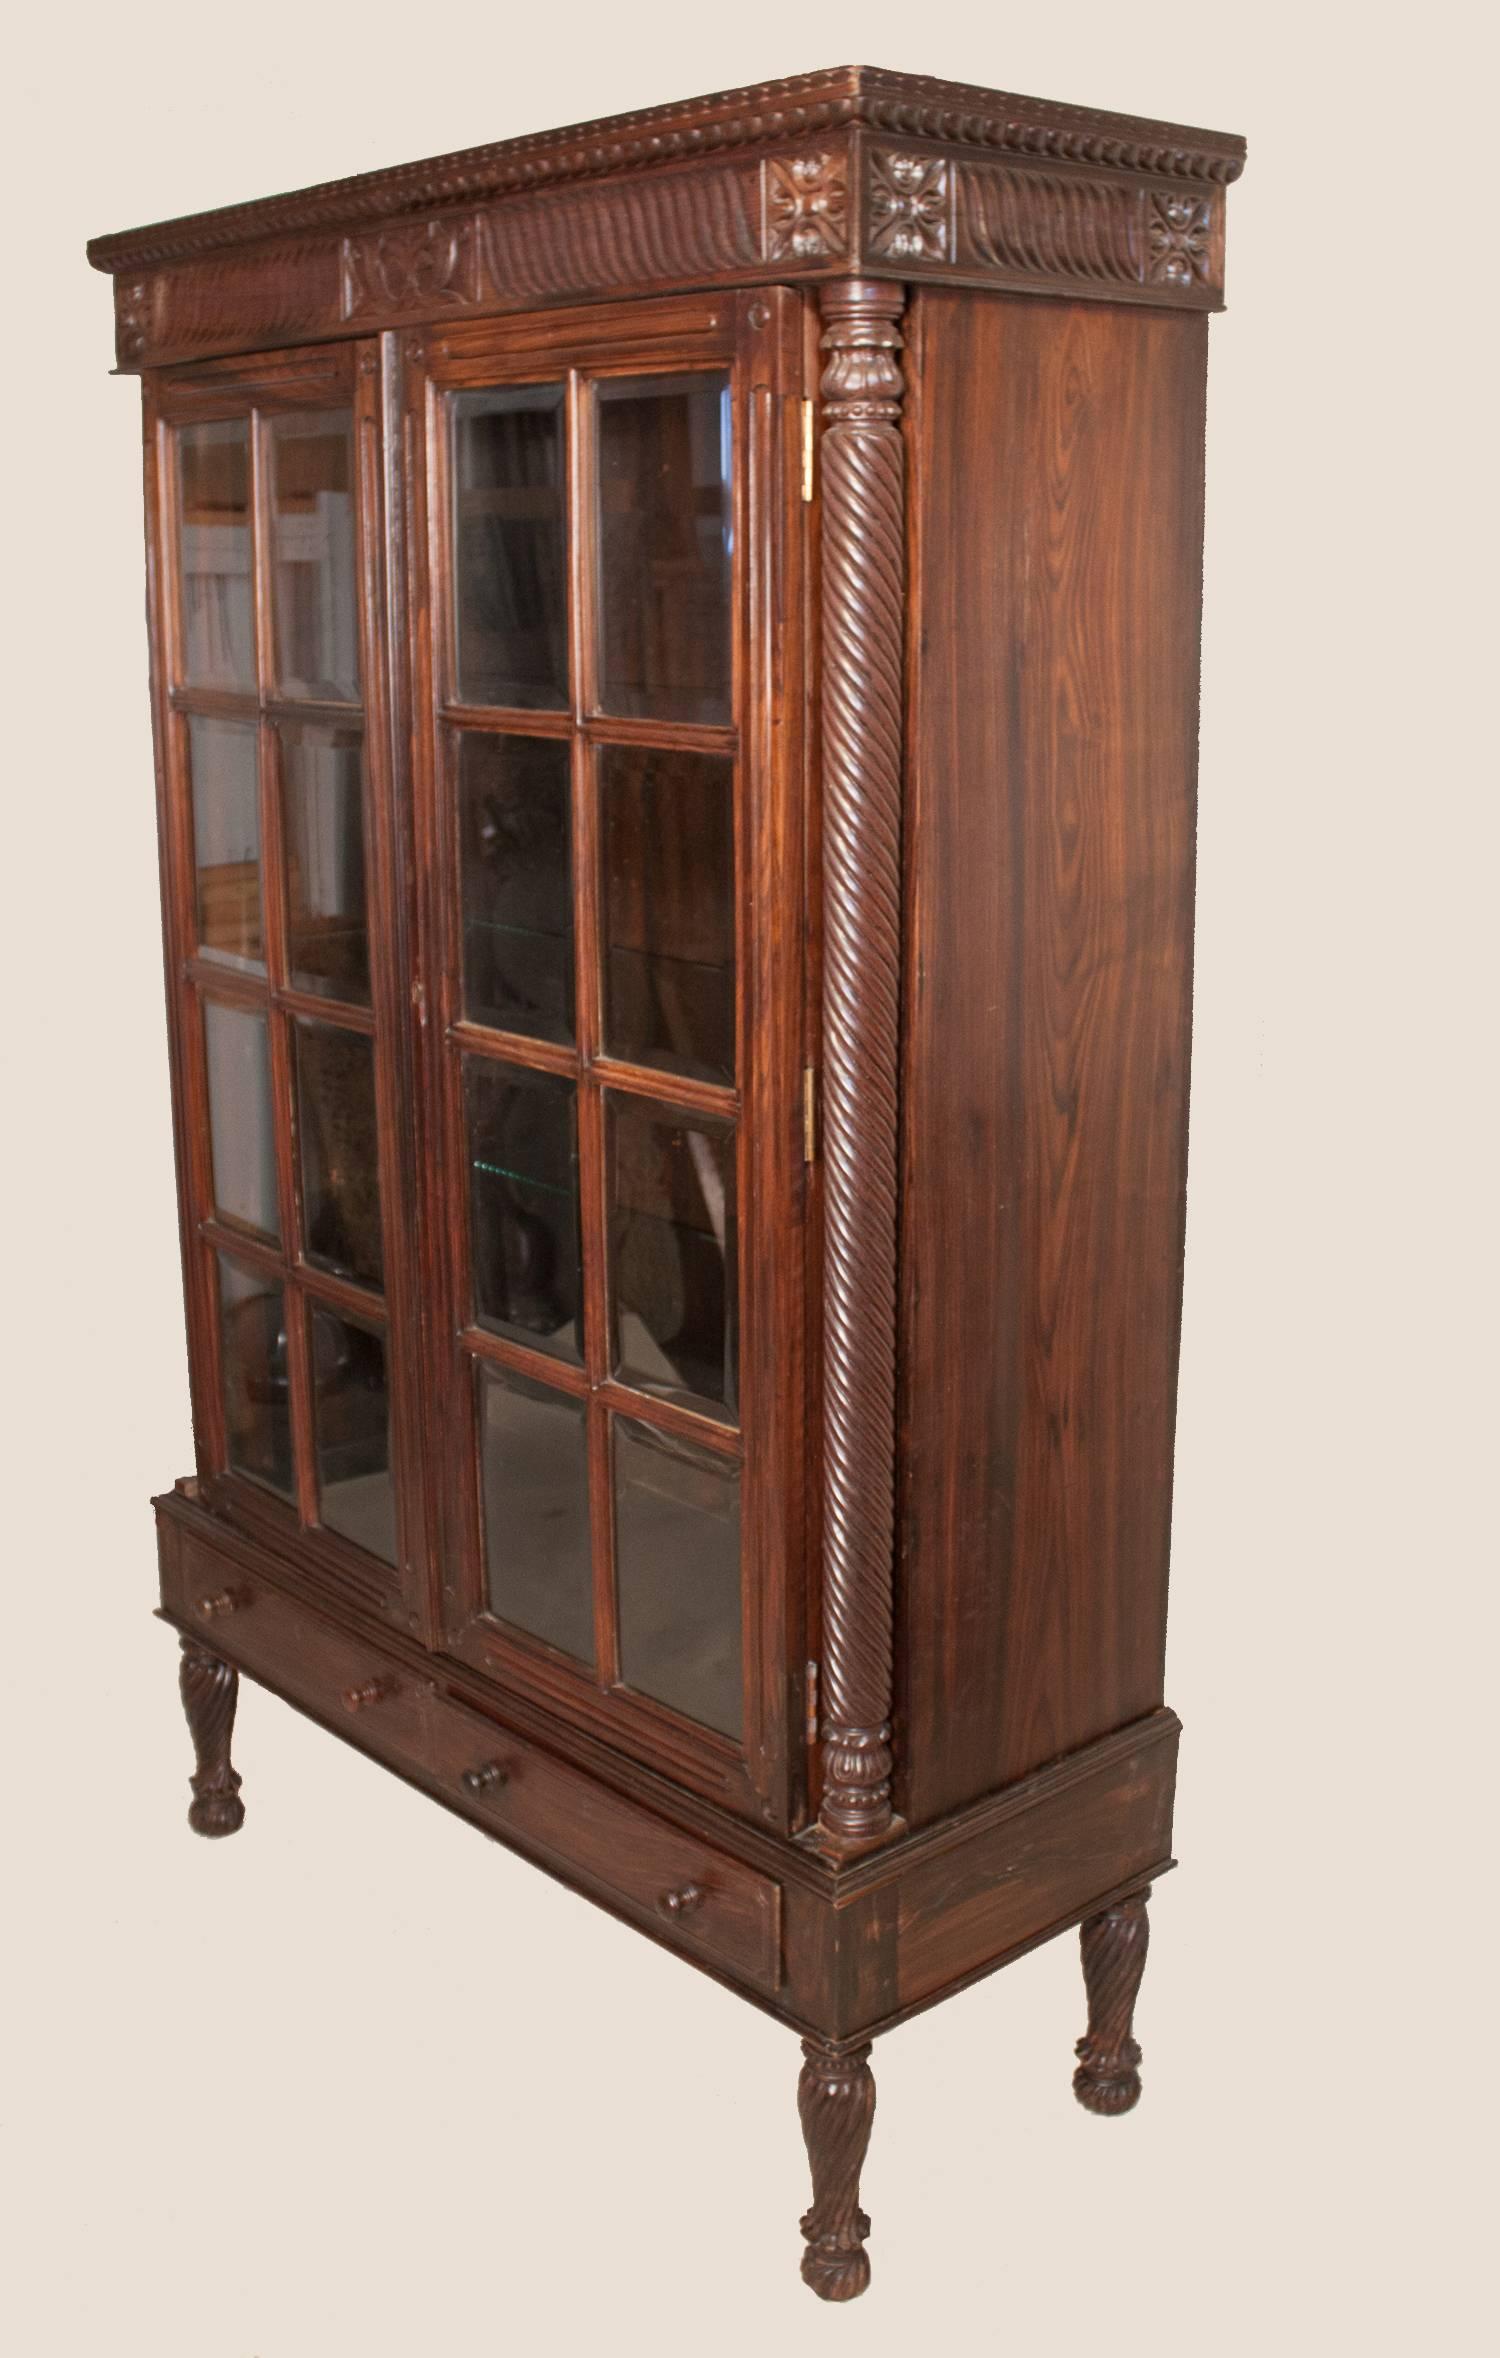 An intricately hand-carved and gadrooned rosewood cabinet with paned, beveled glass doors, circa 1960. This restored British Colonial style piece is crafted in two parts, with a locking cabinet sitting atop a two-drawer stand on shapely legs. Three